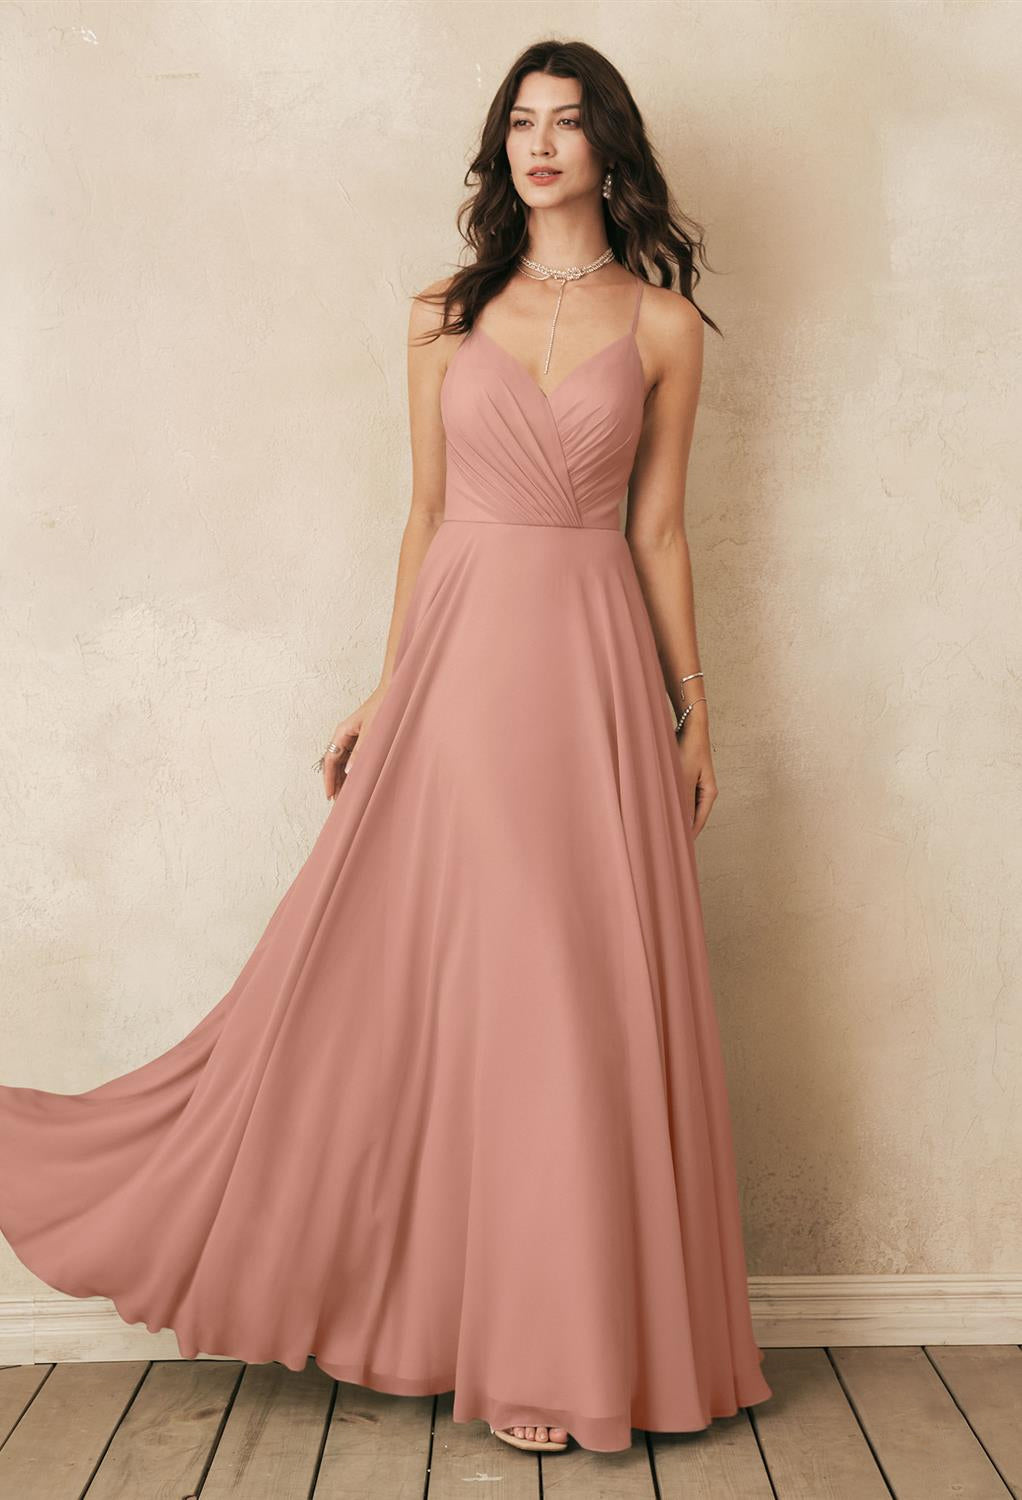 The bridesmaid is wearing a Melody - Chiffon Bridesmaid Dress - Off the Rack purchased from Bergamot Bridal in London.